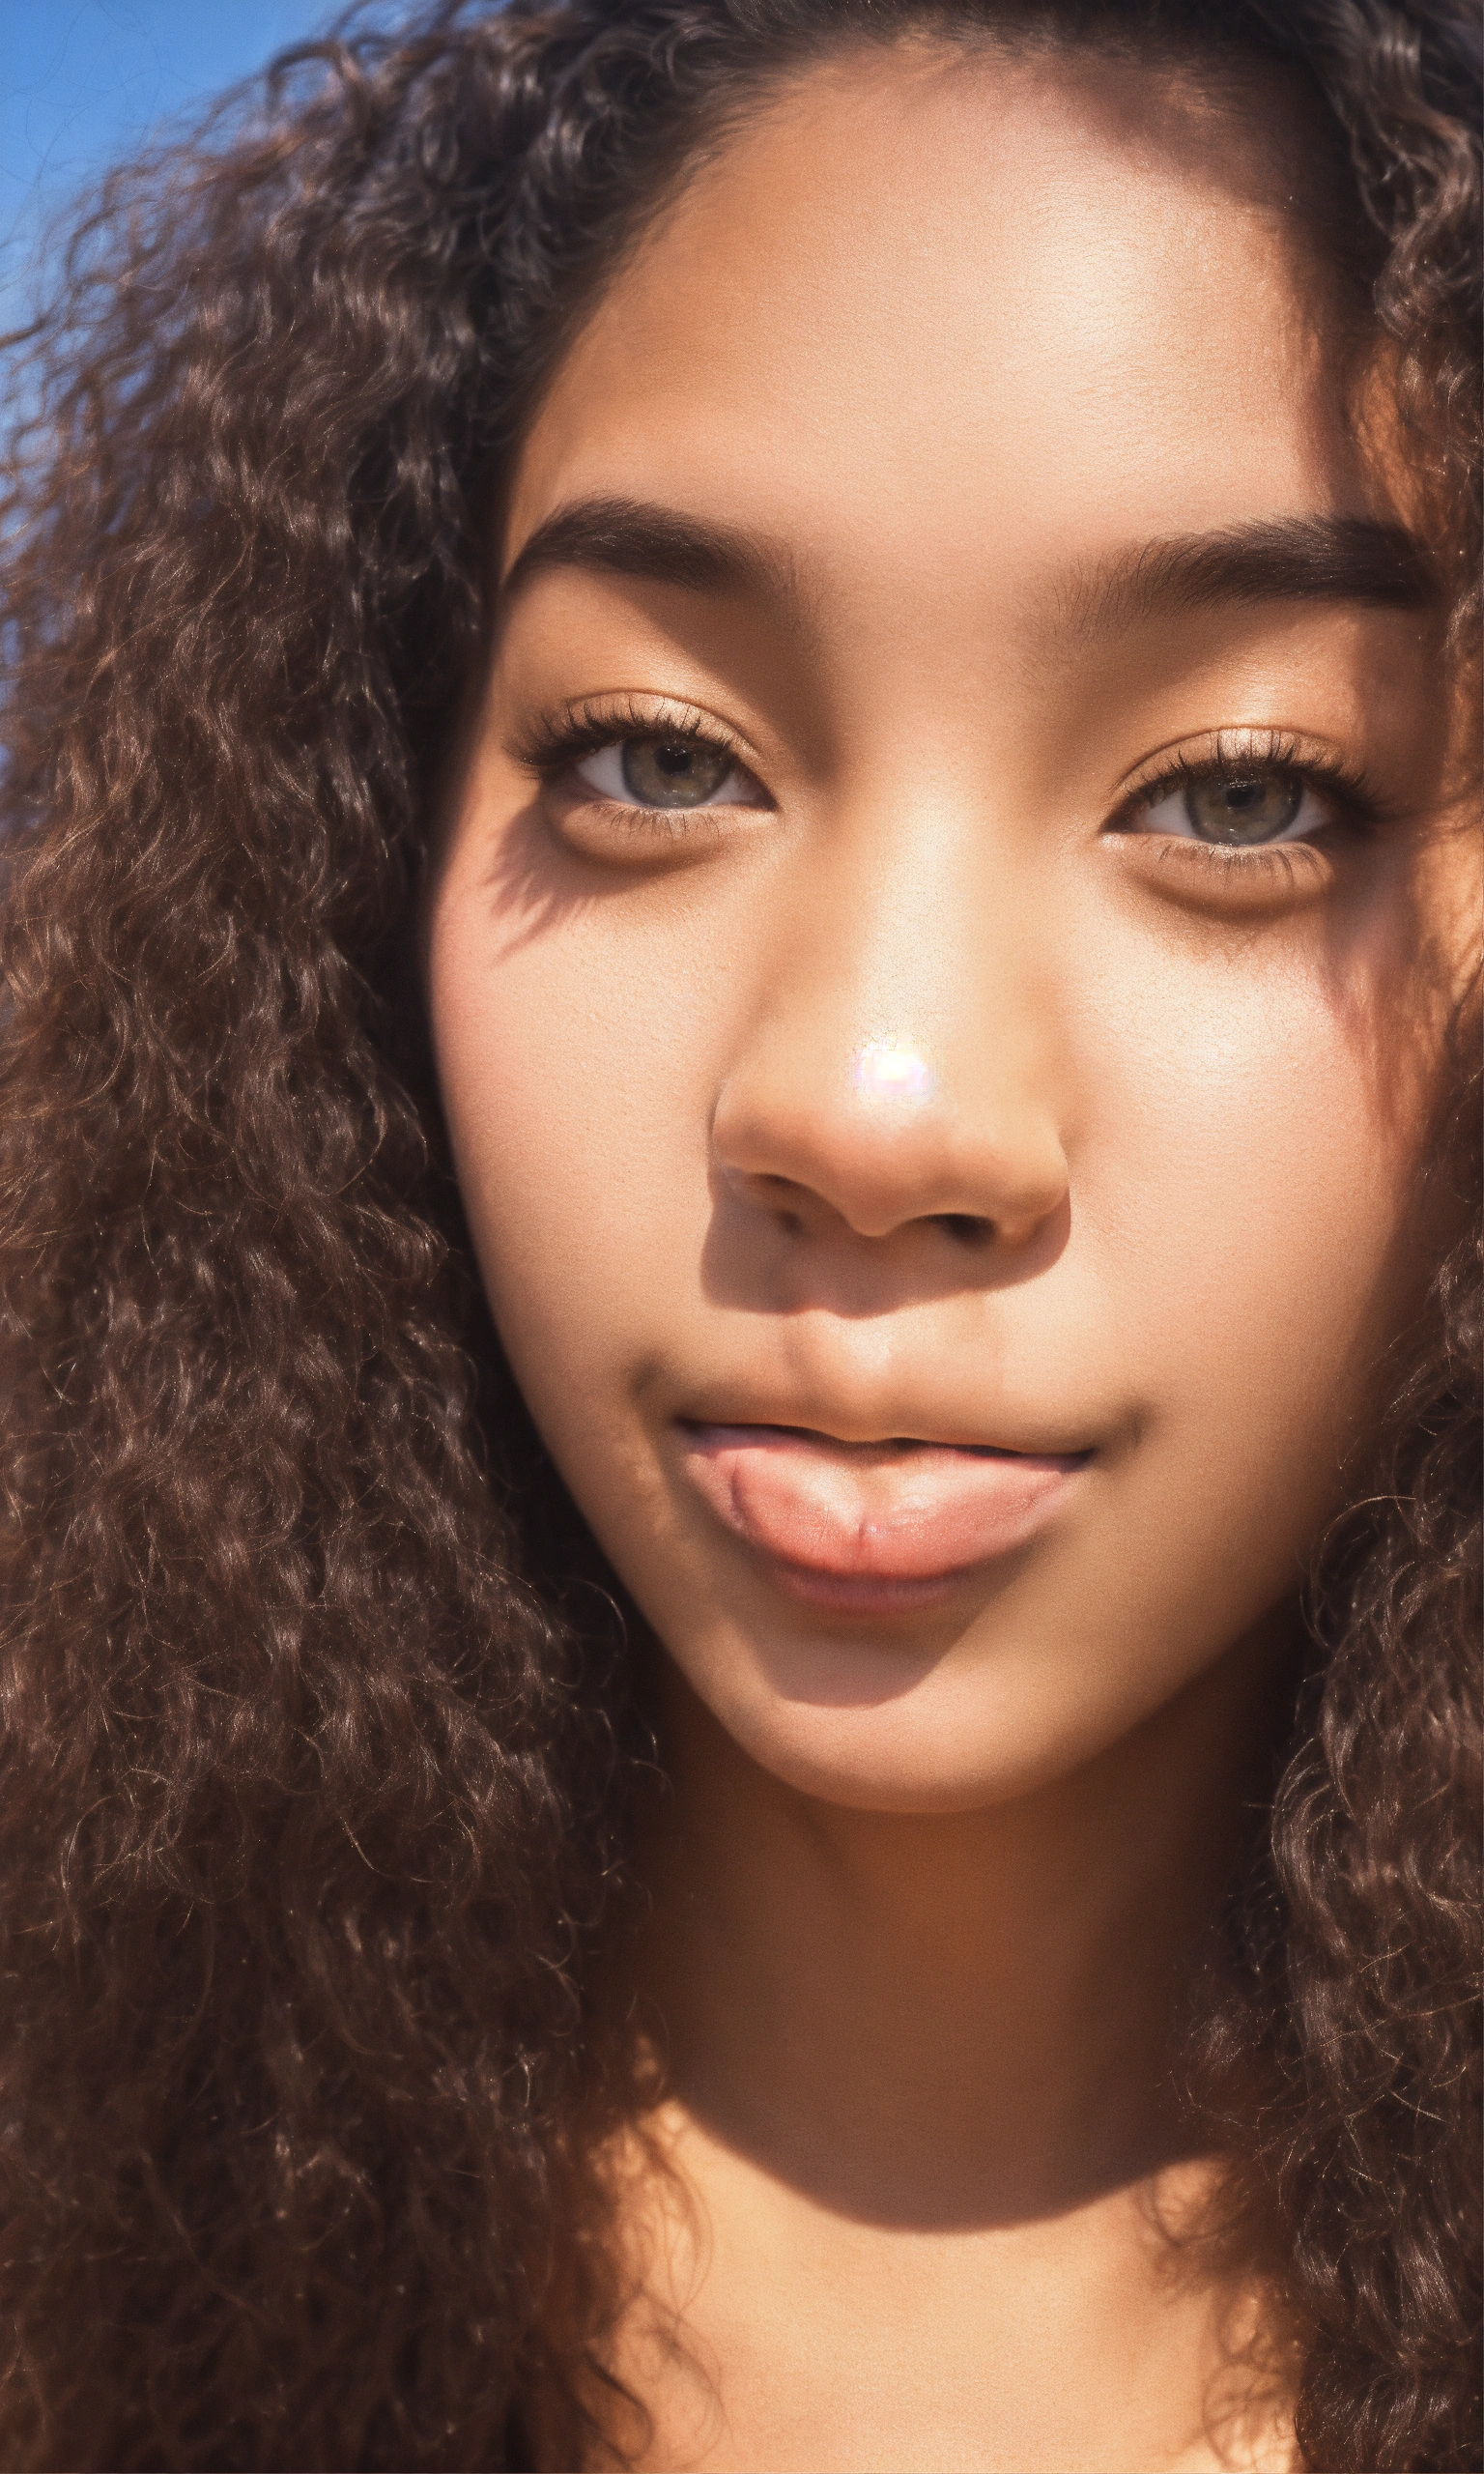 Lexica Create A Selfie Of A Beautiful 18 Year Old Girl Of Mixed Black And Japanese Descent